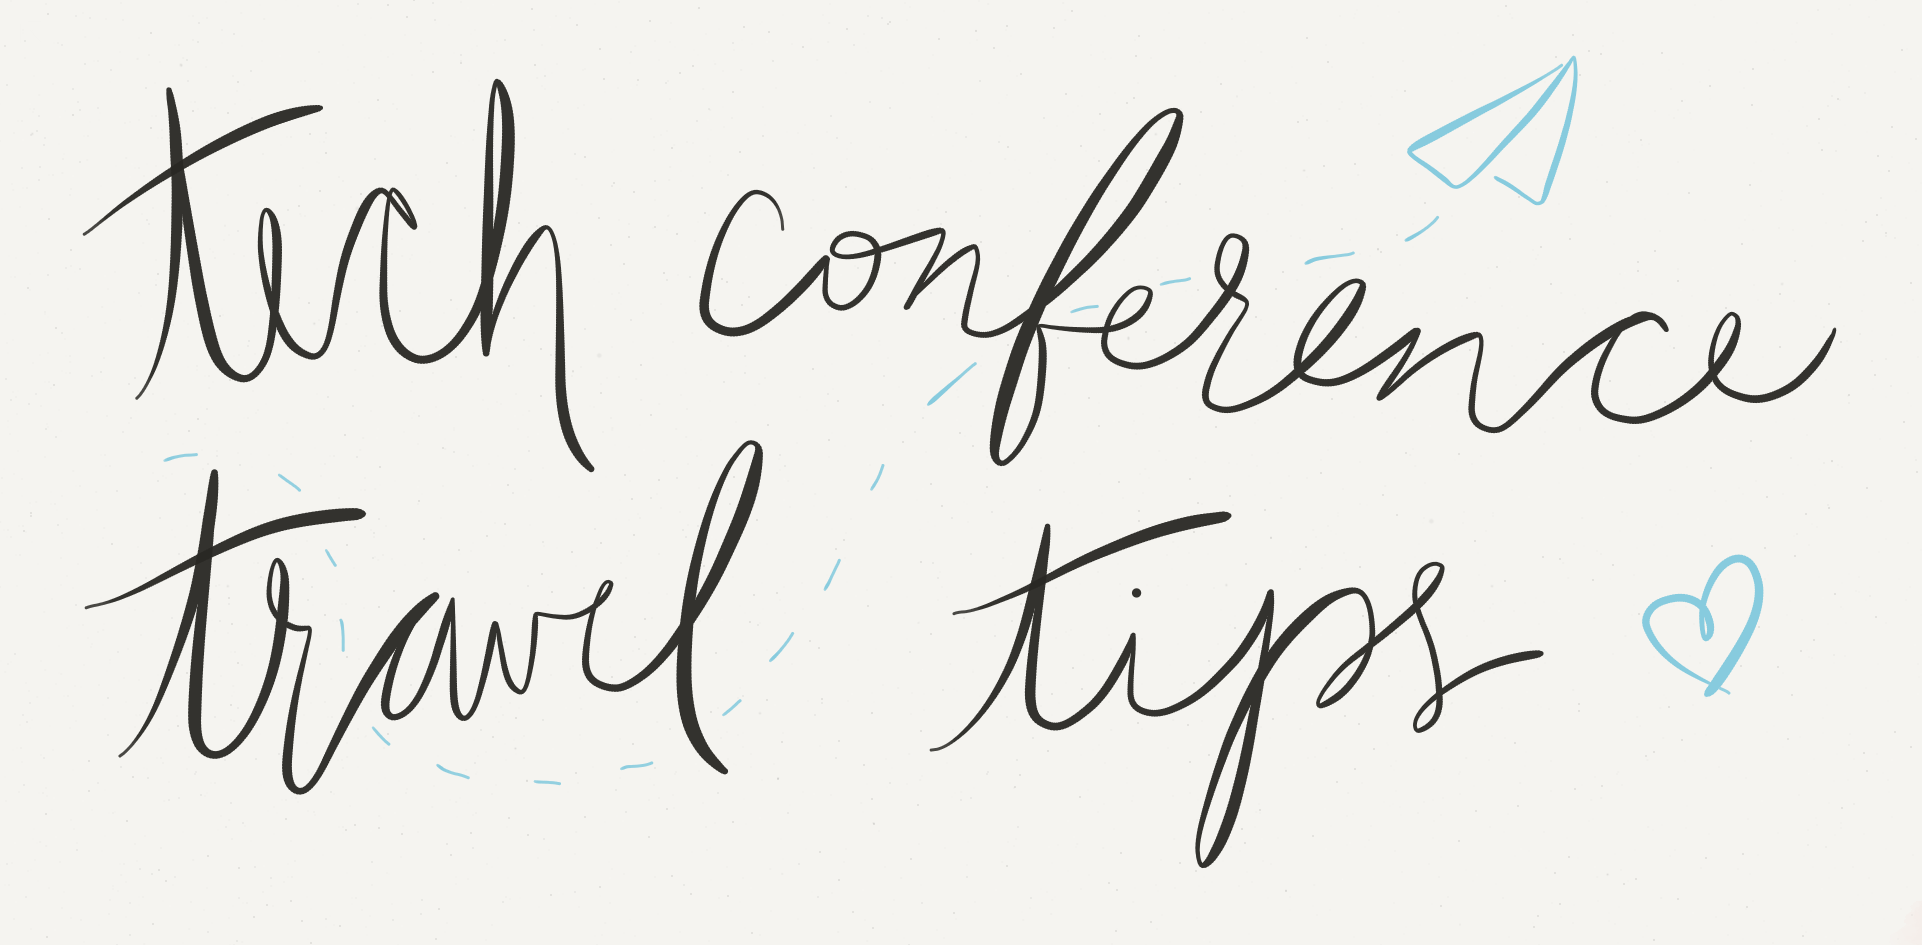 conference travel tips